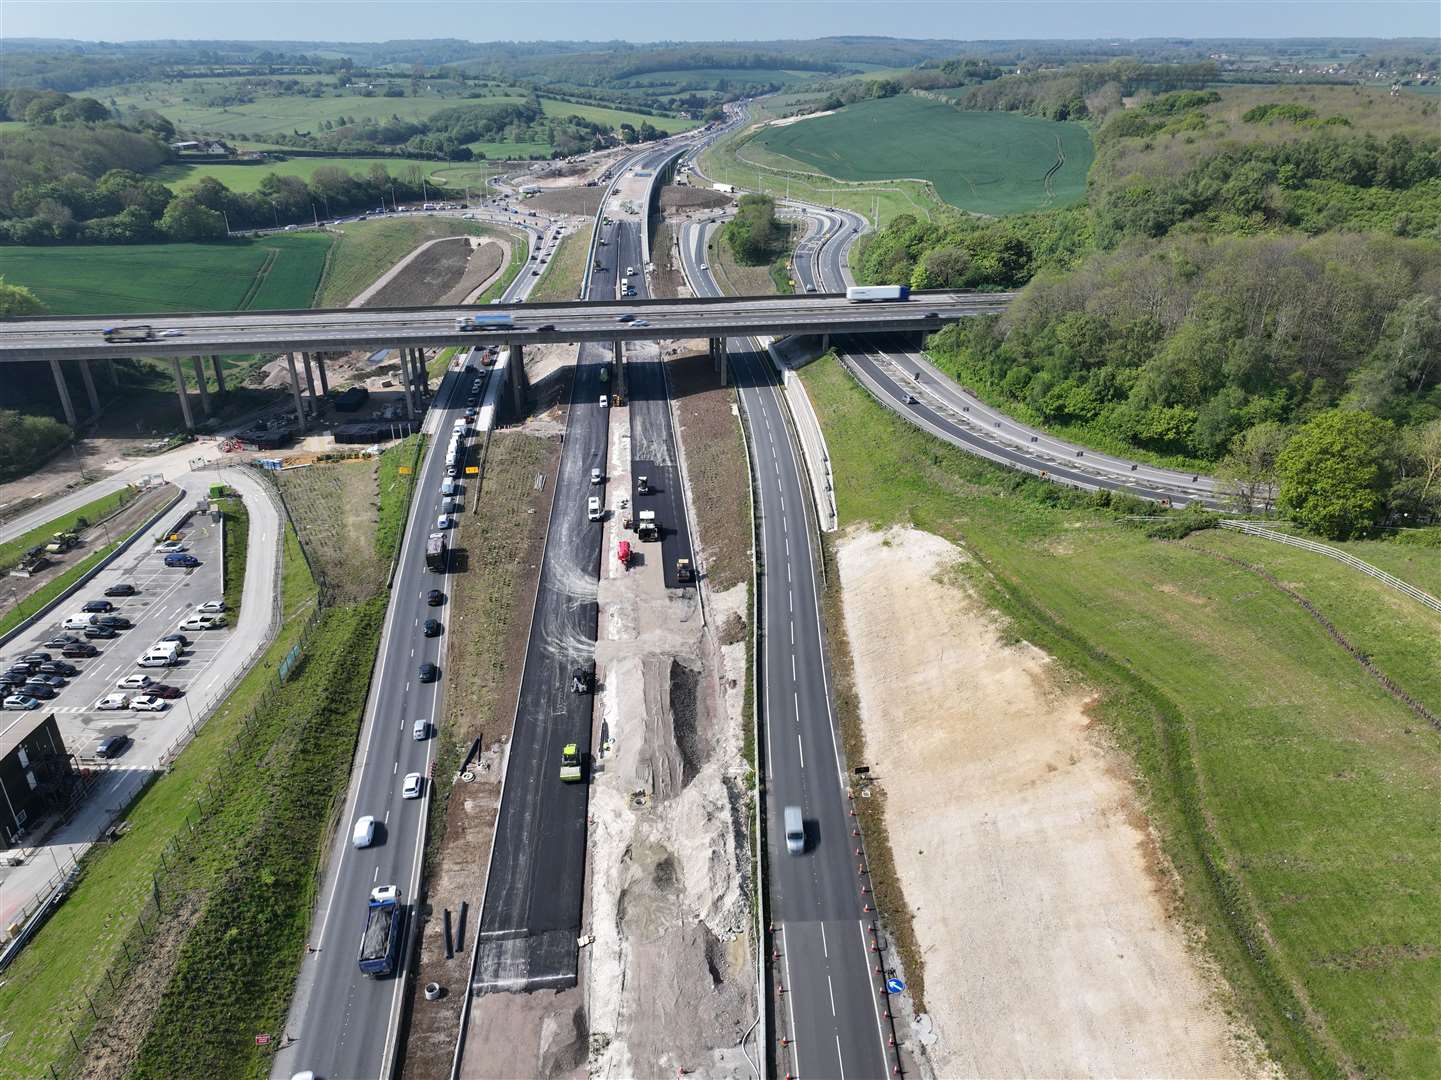 The A249 at Stockbury is currently subject to road works with the creation of a new flyover at the roundabout. Picture: Phil Drew